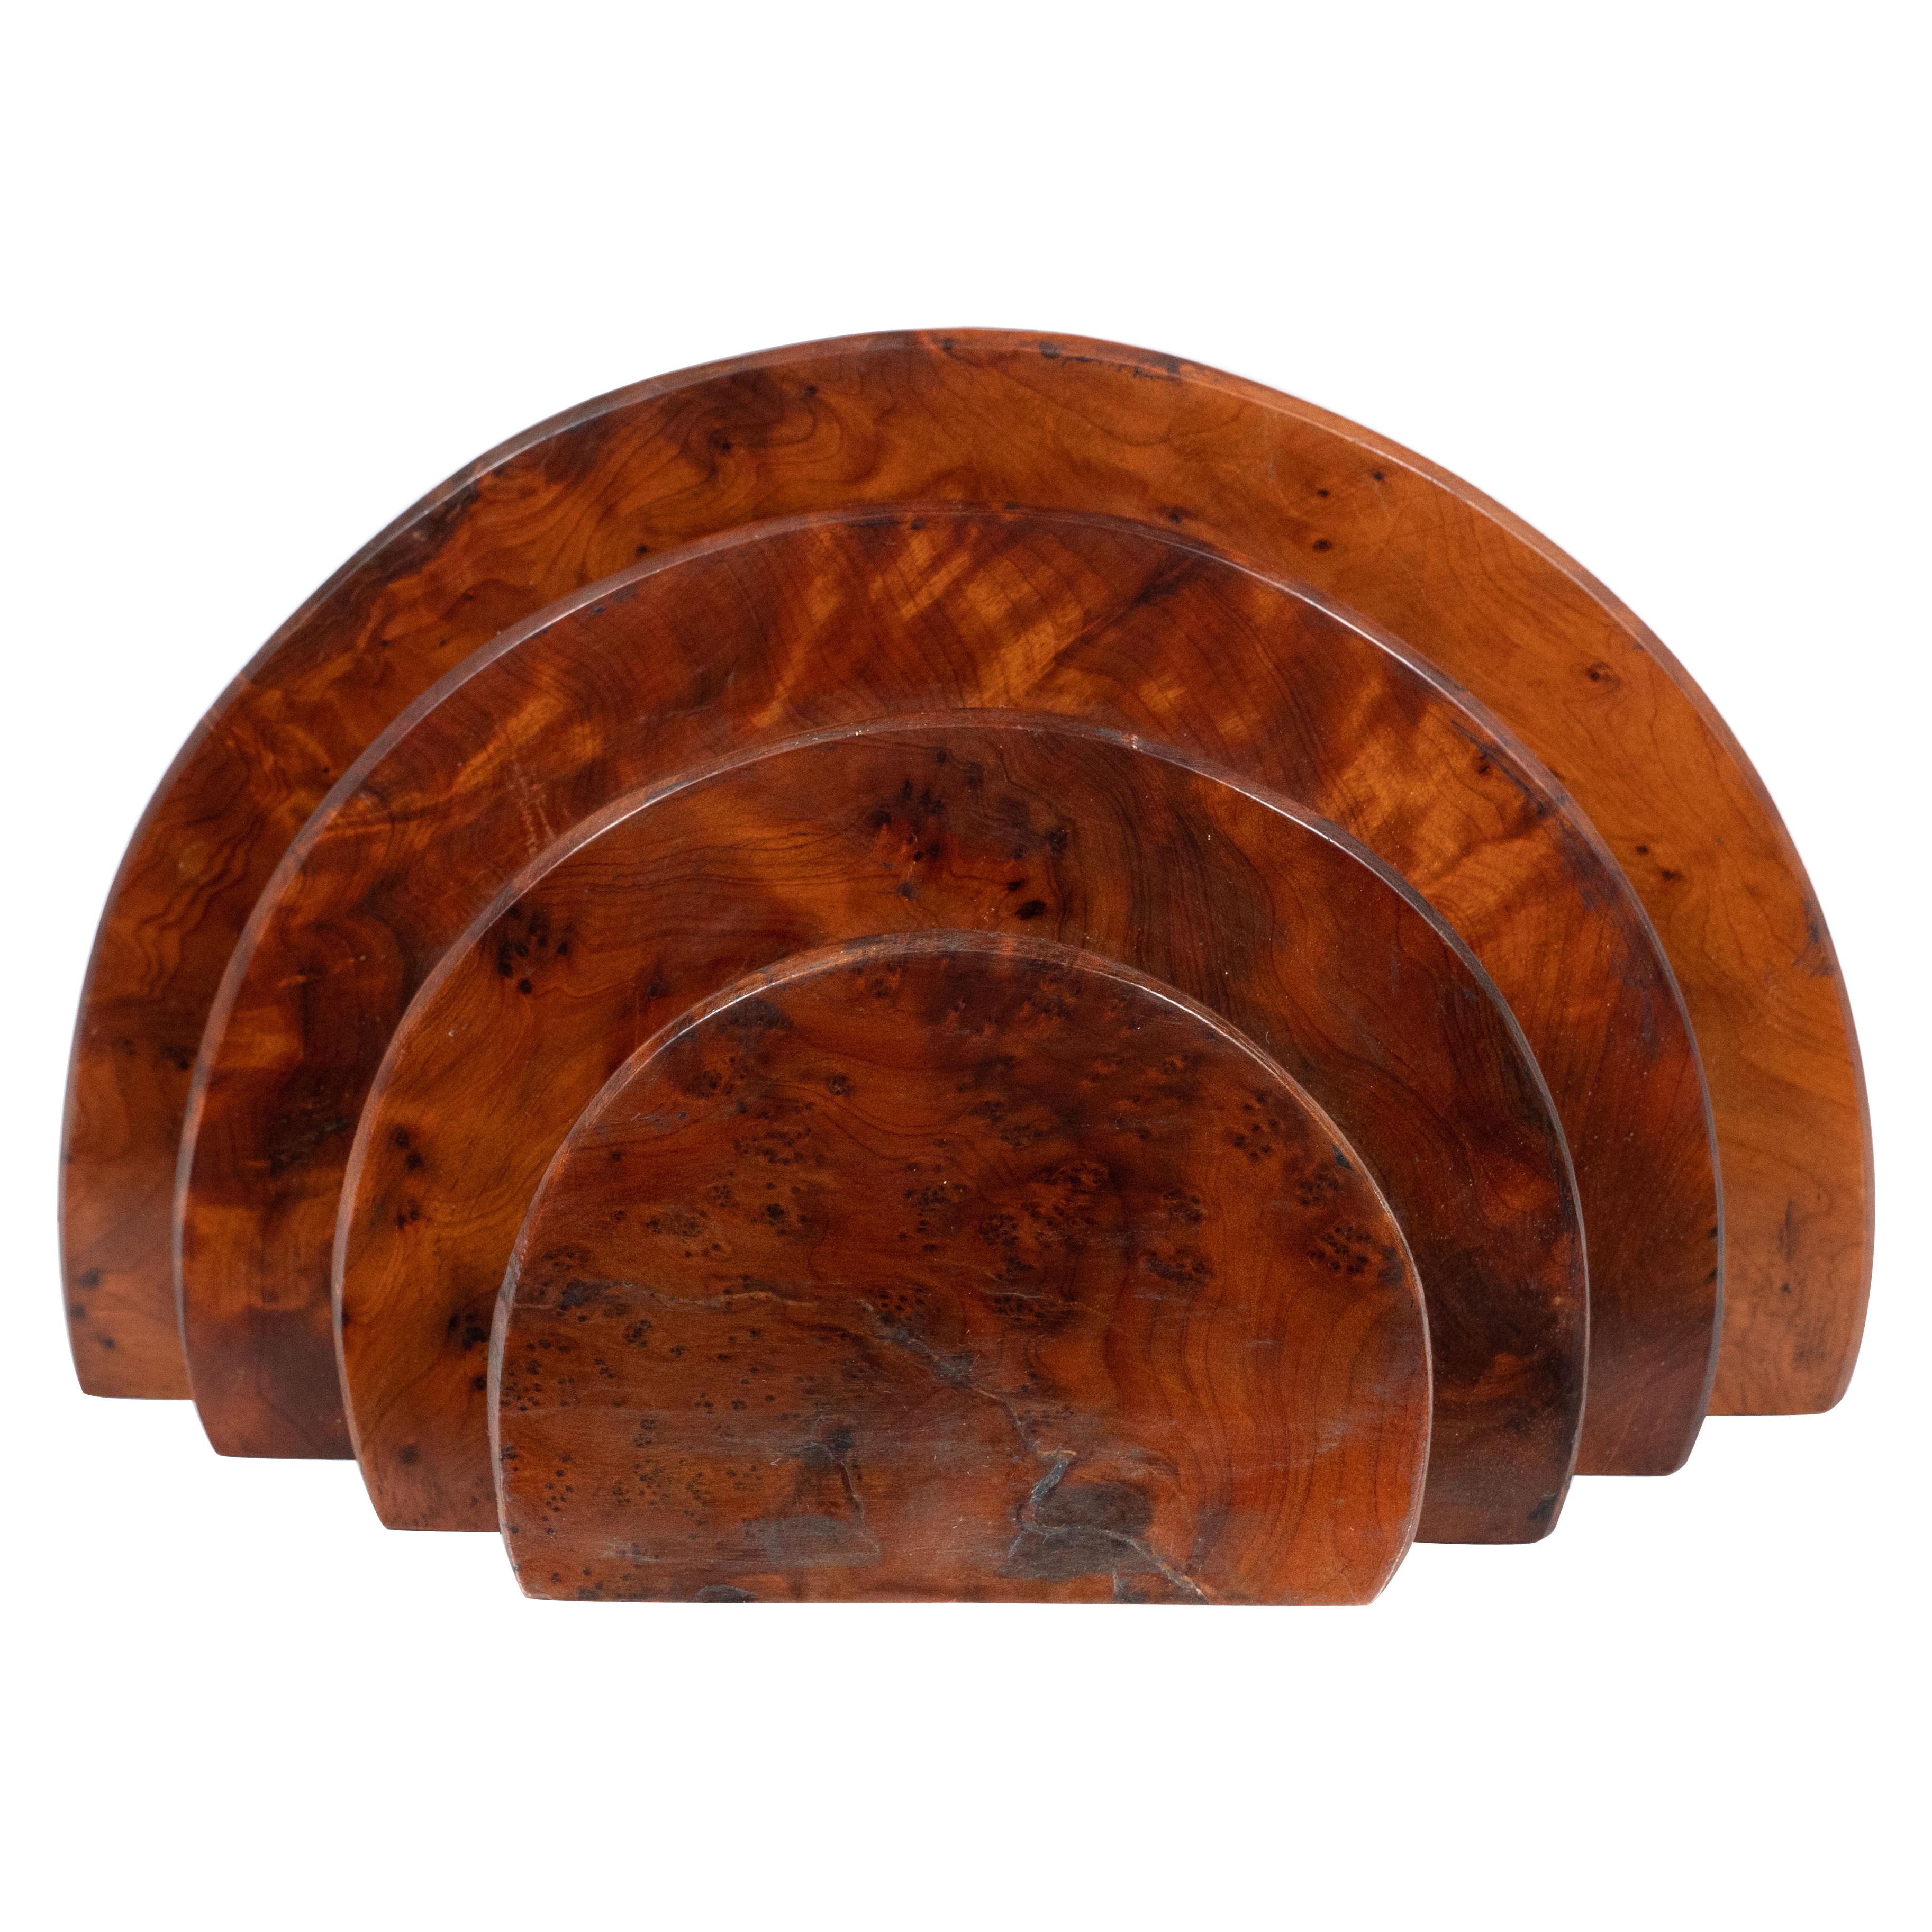 This elegant Art Deco Skyscraper style letter holder was realized in the United States, circa 1930. It features four concentric demilune streamlined forms that diminish in size from back to front. Realized in burled carpathian elm, the piece